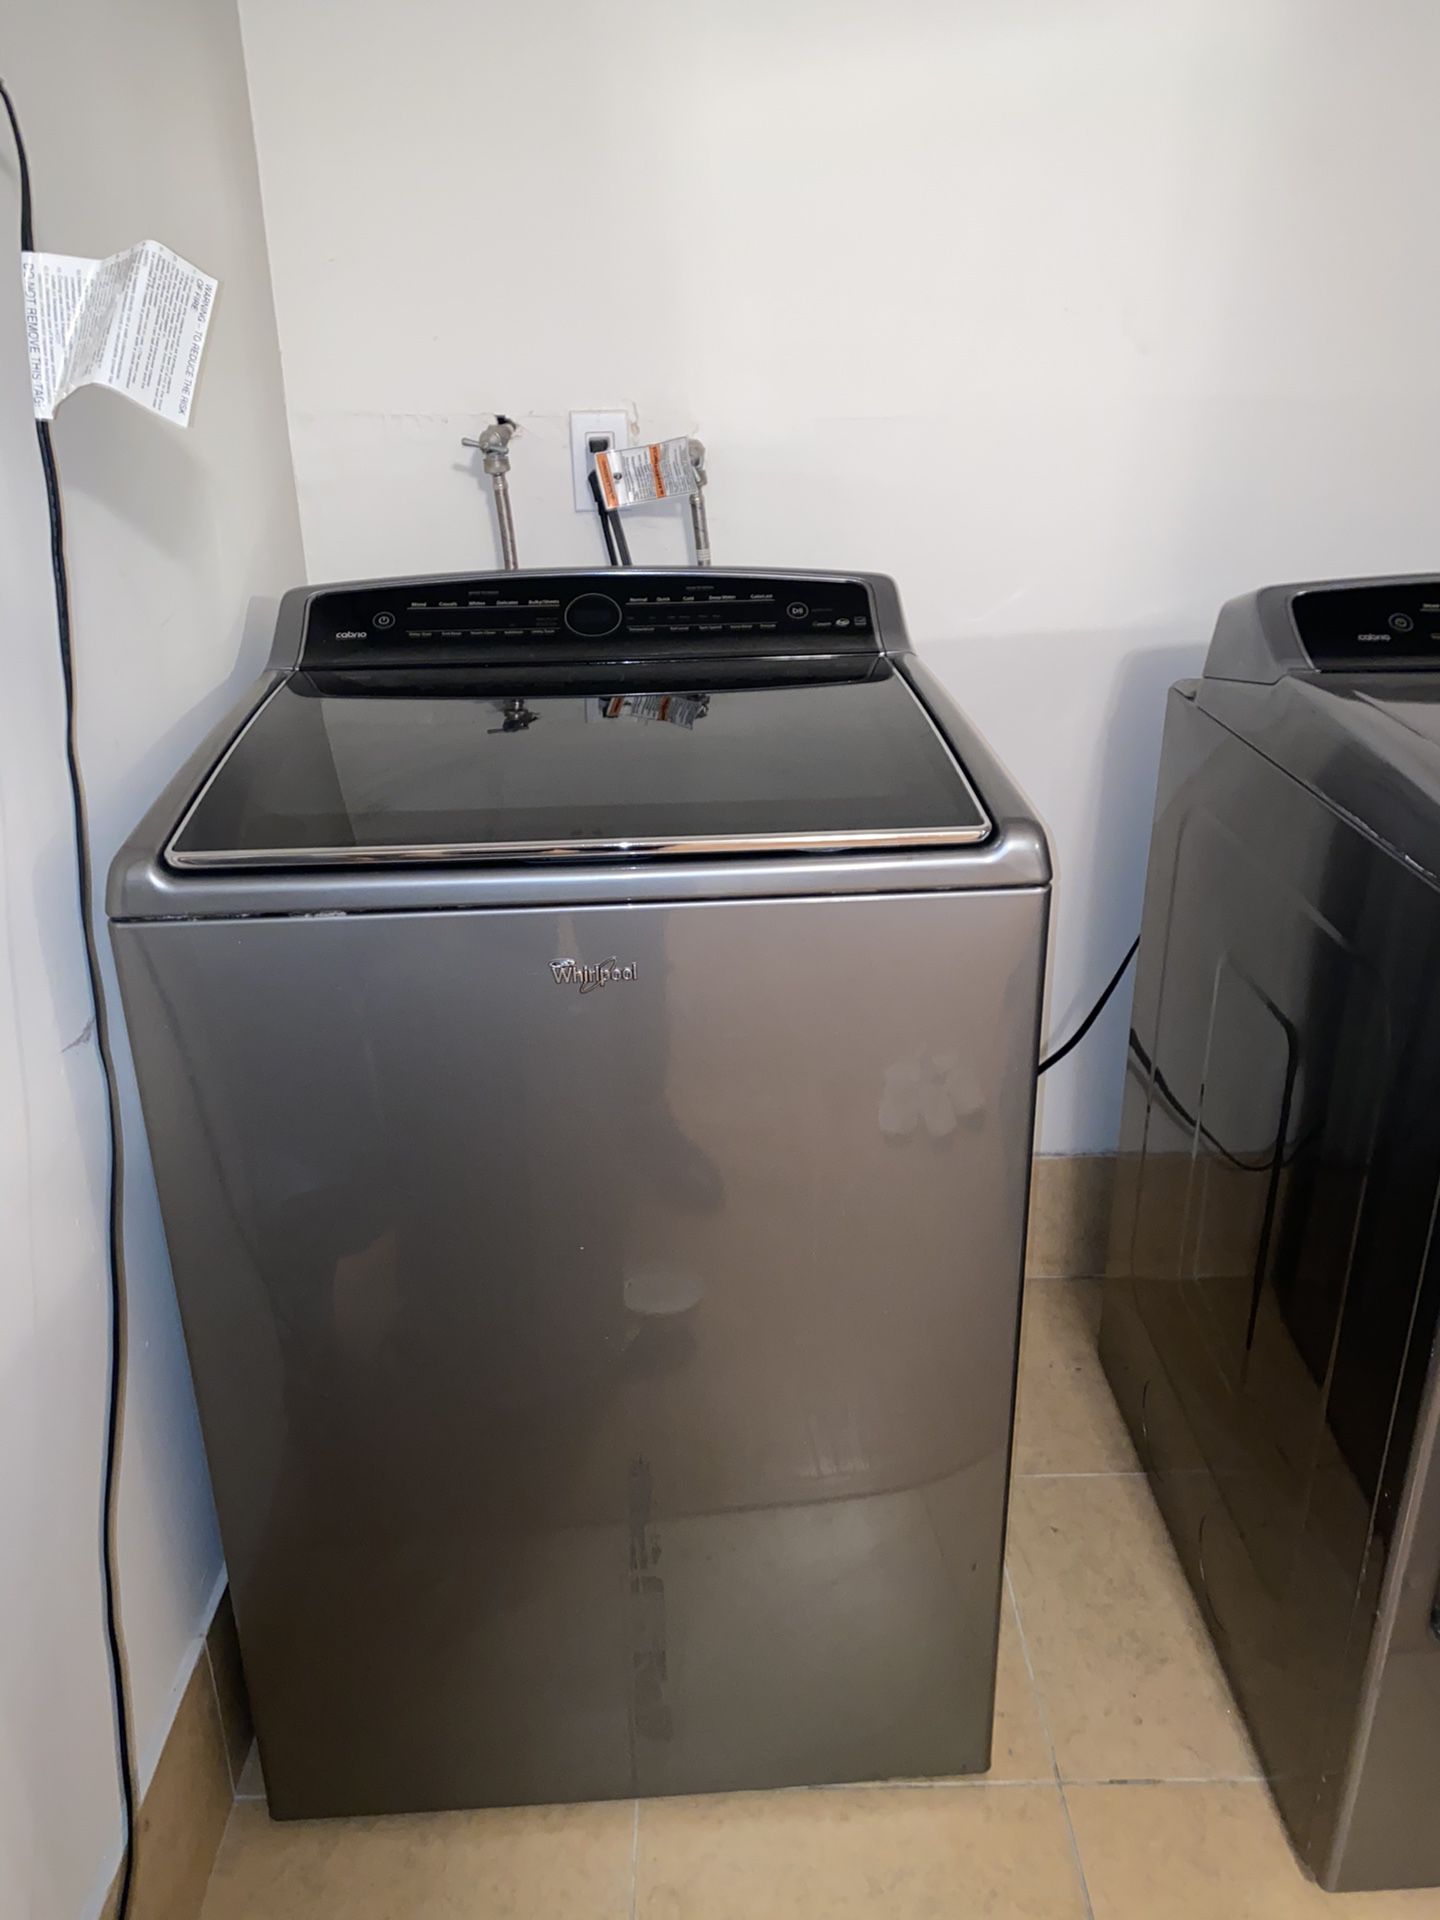 Set of new dryer and washer only for 700$